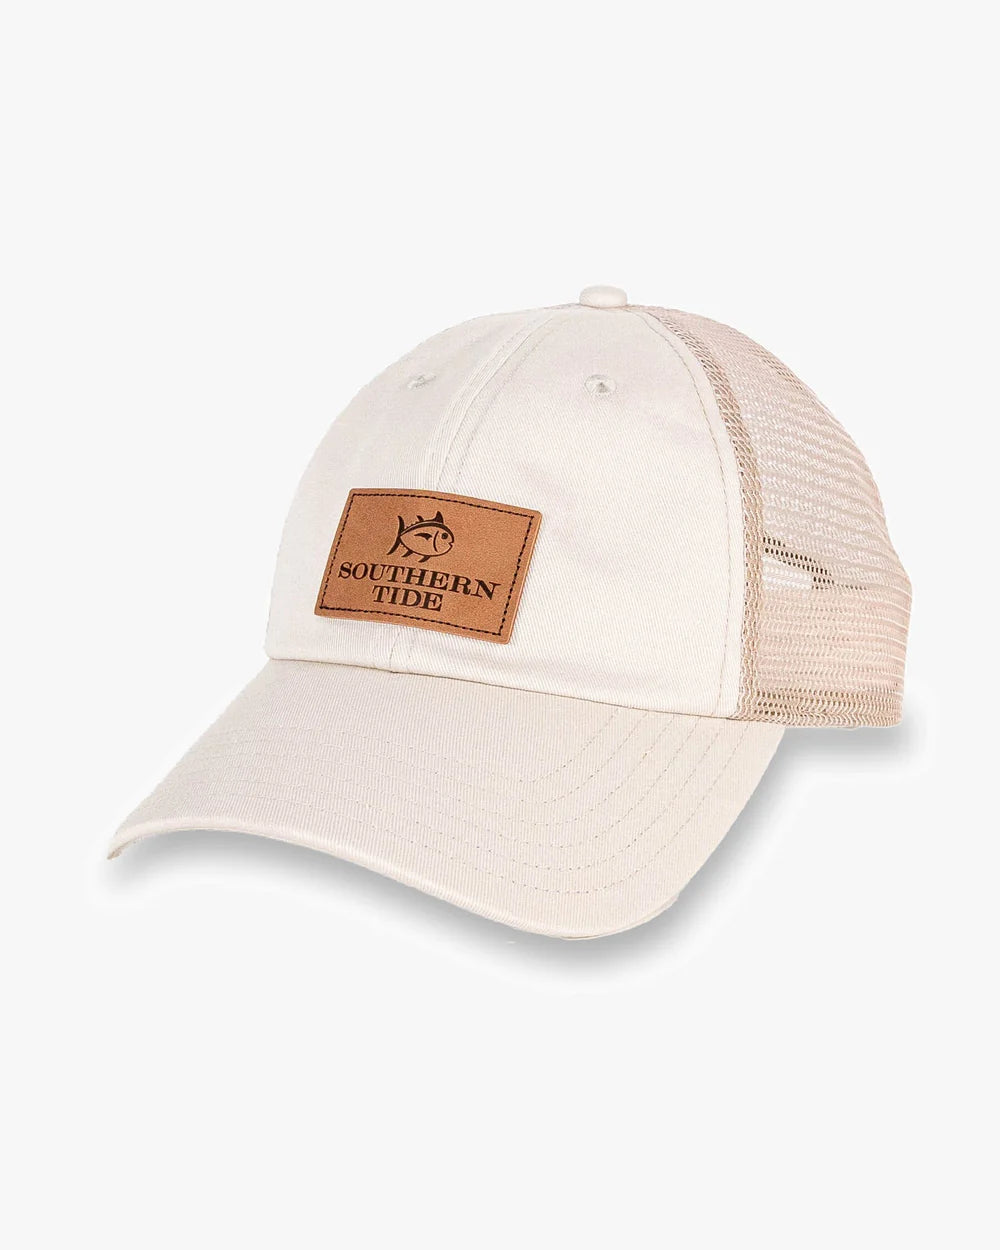 Southern Tide Leather Patch Trucker Hat